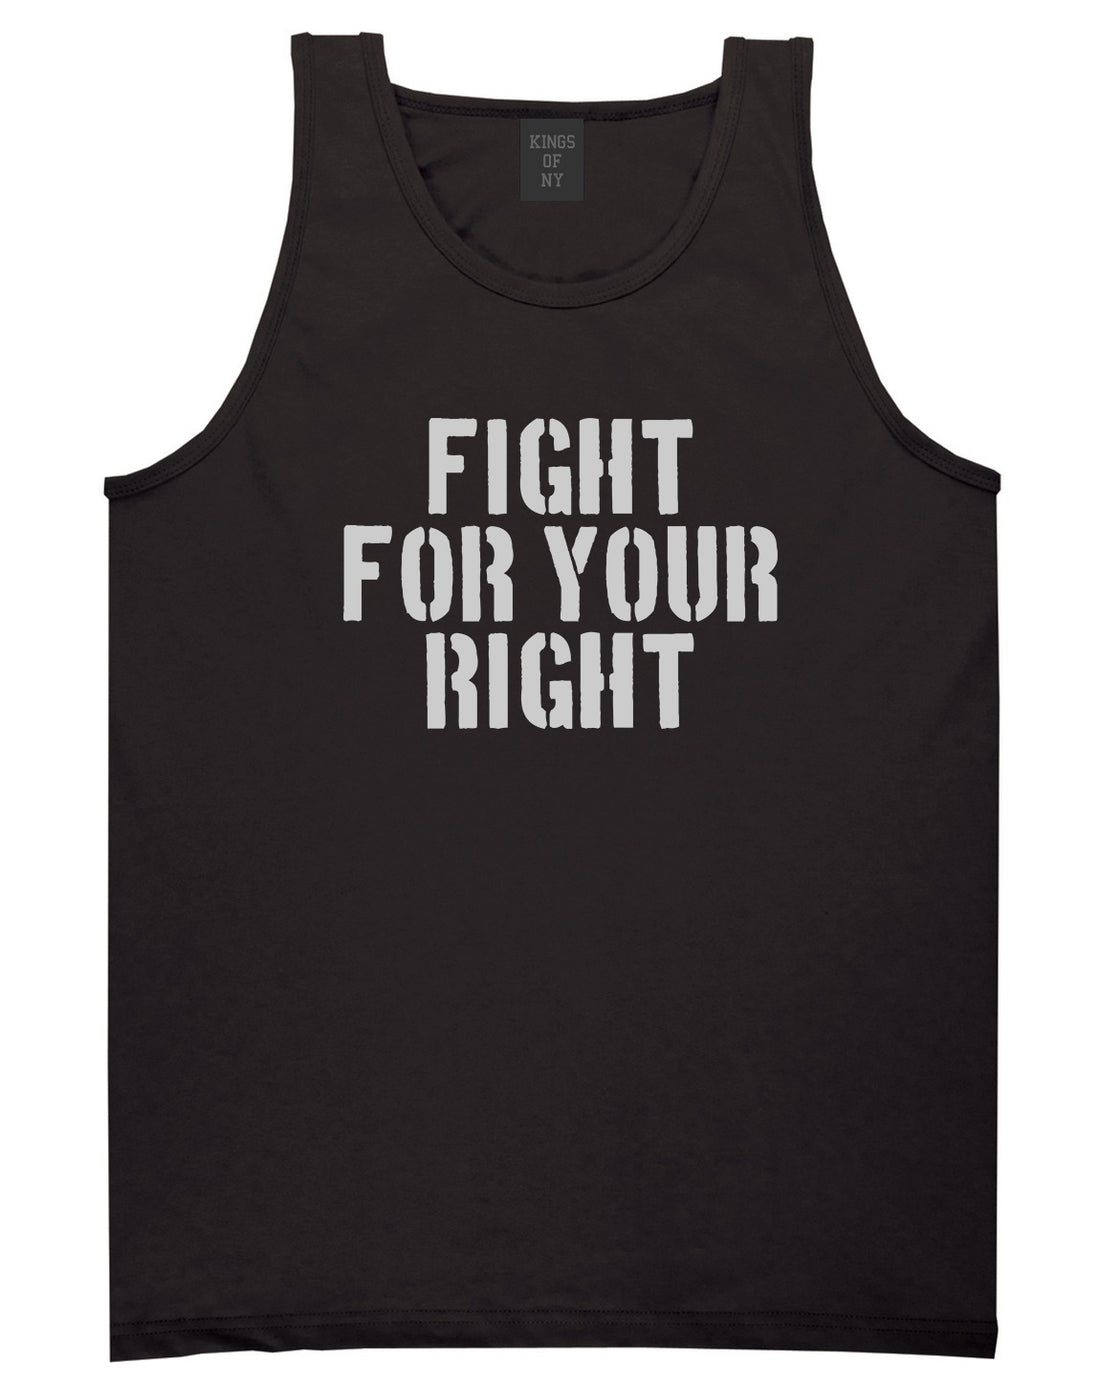 Fight For Your Right Mens Tank Top Shirt Black